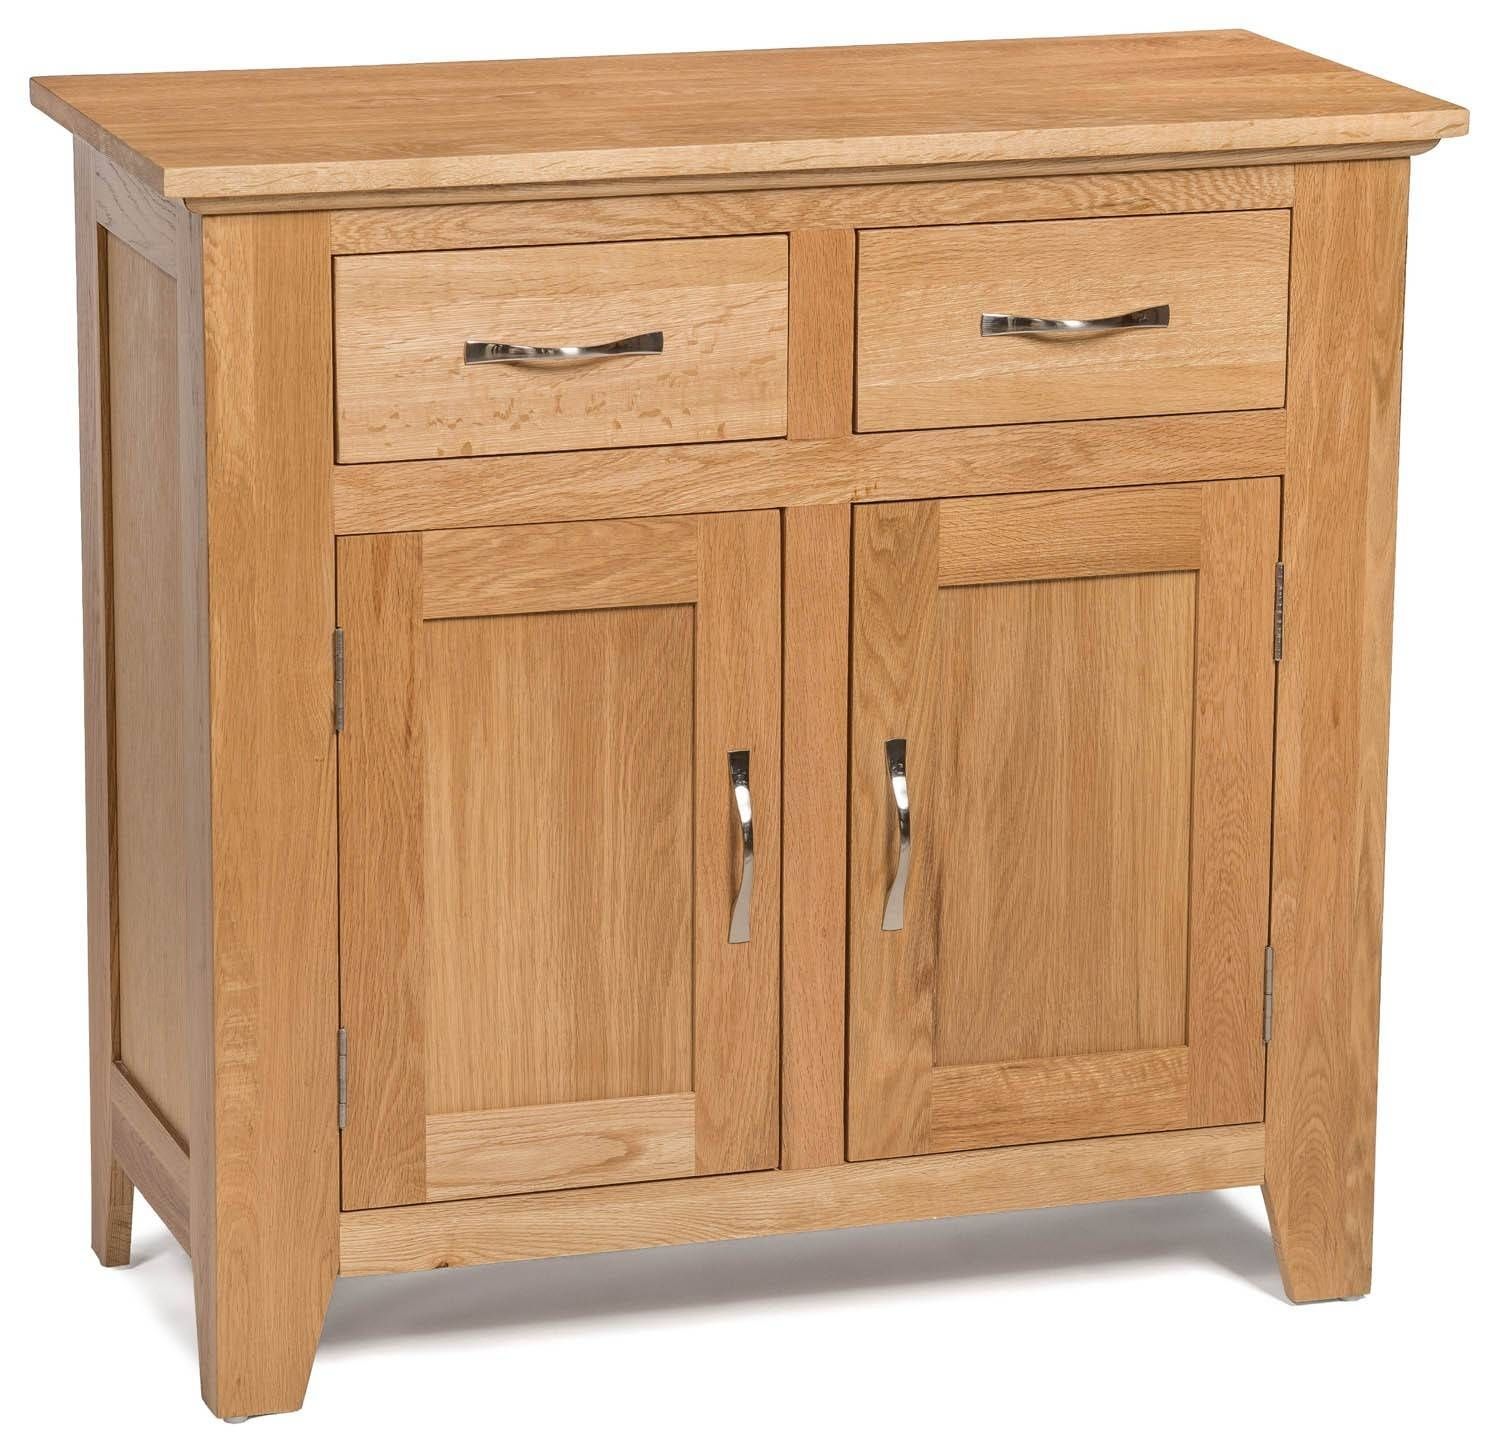 Camberley Oak Small 2 Door 2 Drawer Sideboard | Hallowood With Regard To Current Solid Oak Small Sideboards (Photo 10 of 15)